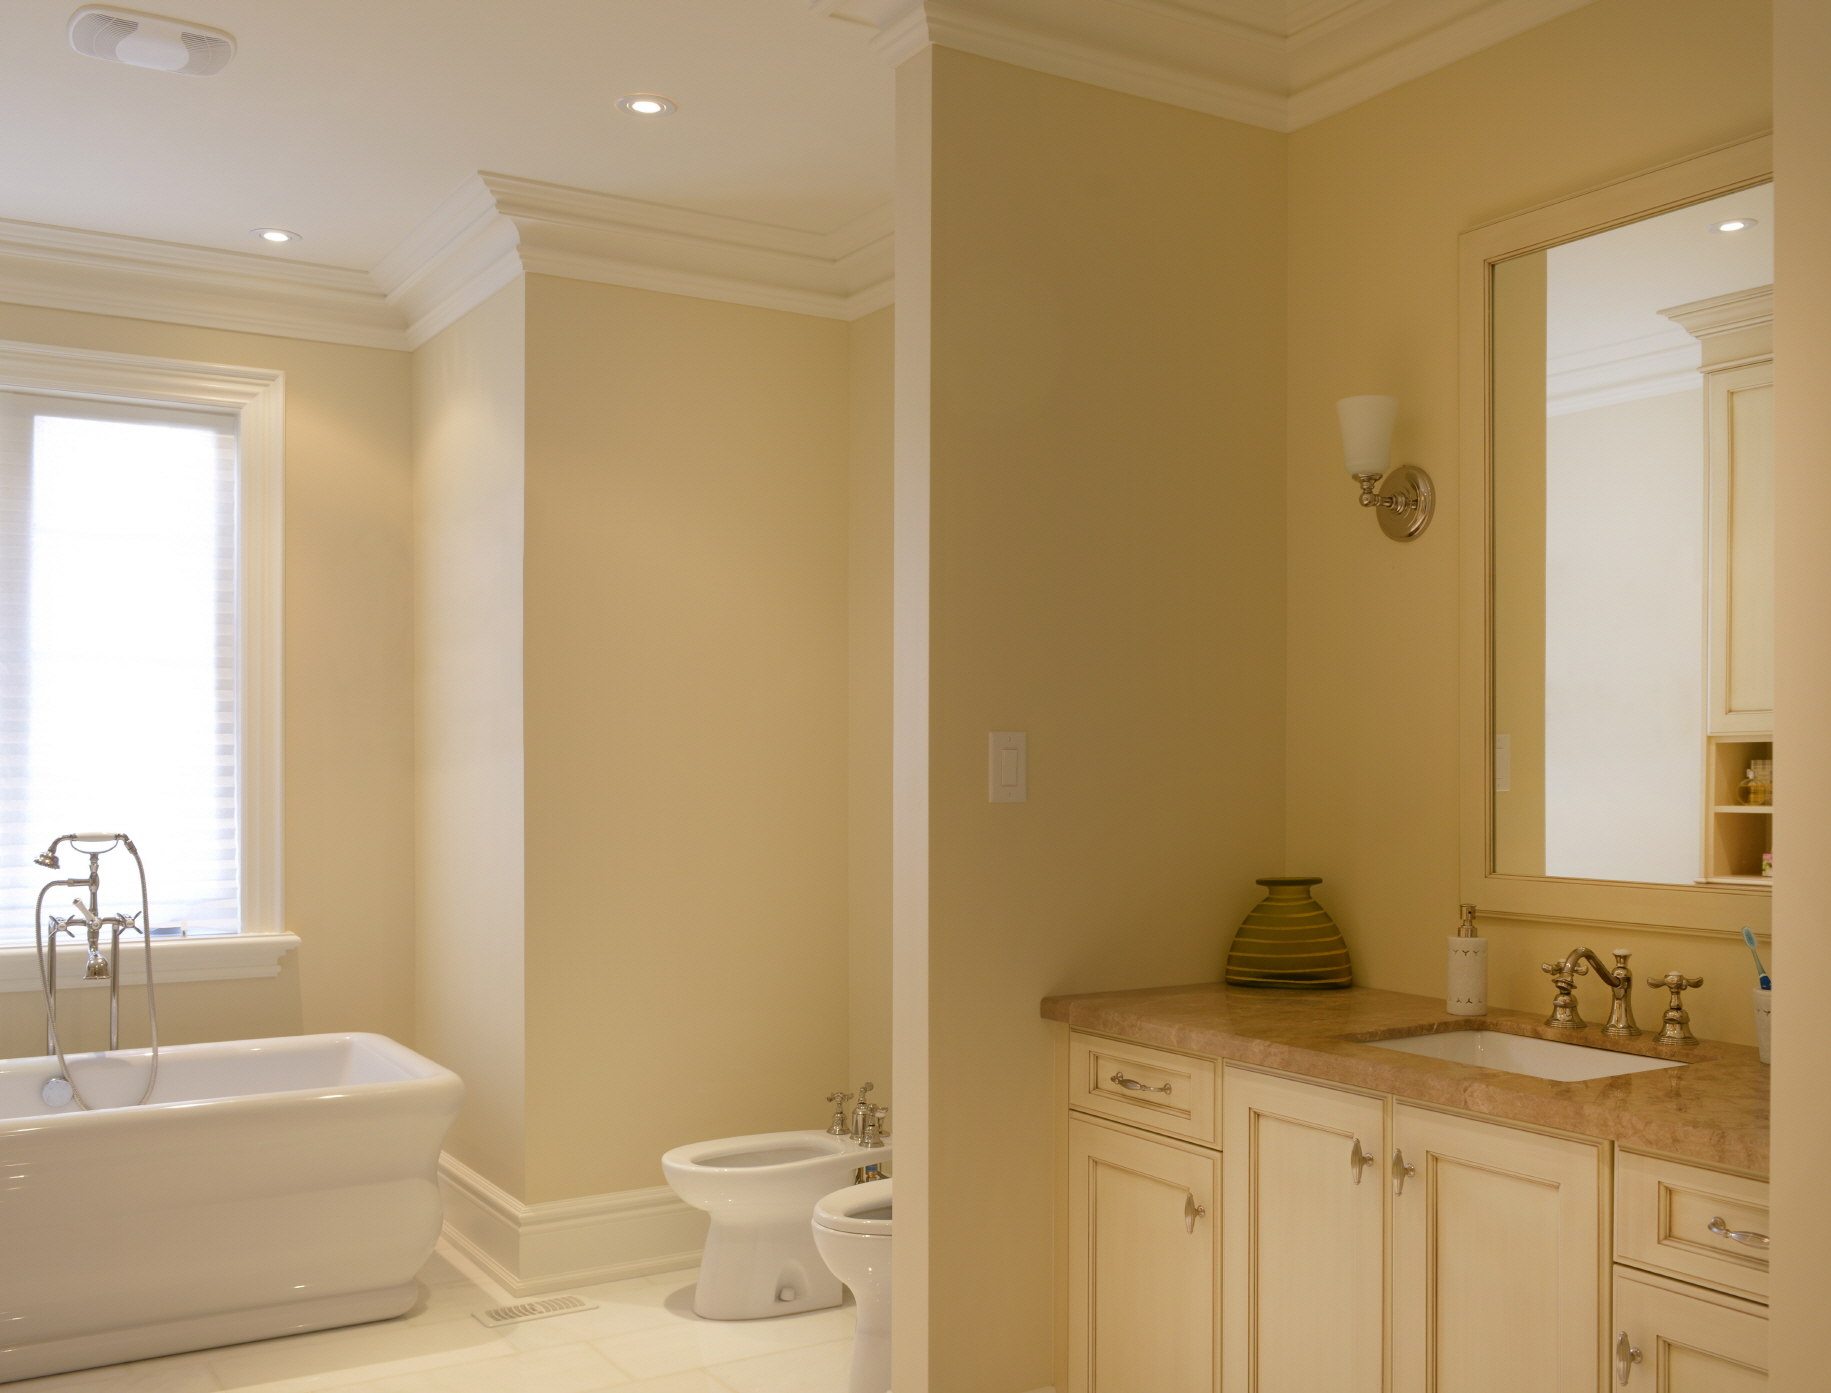 Warm up your guest bathroom with a palette of bright, welcoming tones like soft yellows and warm neutrals.